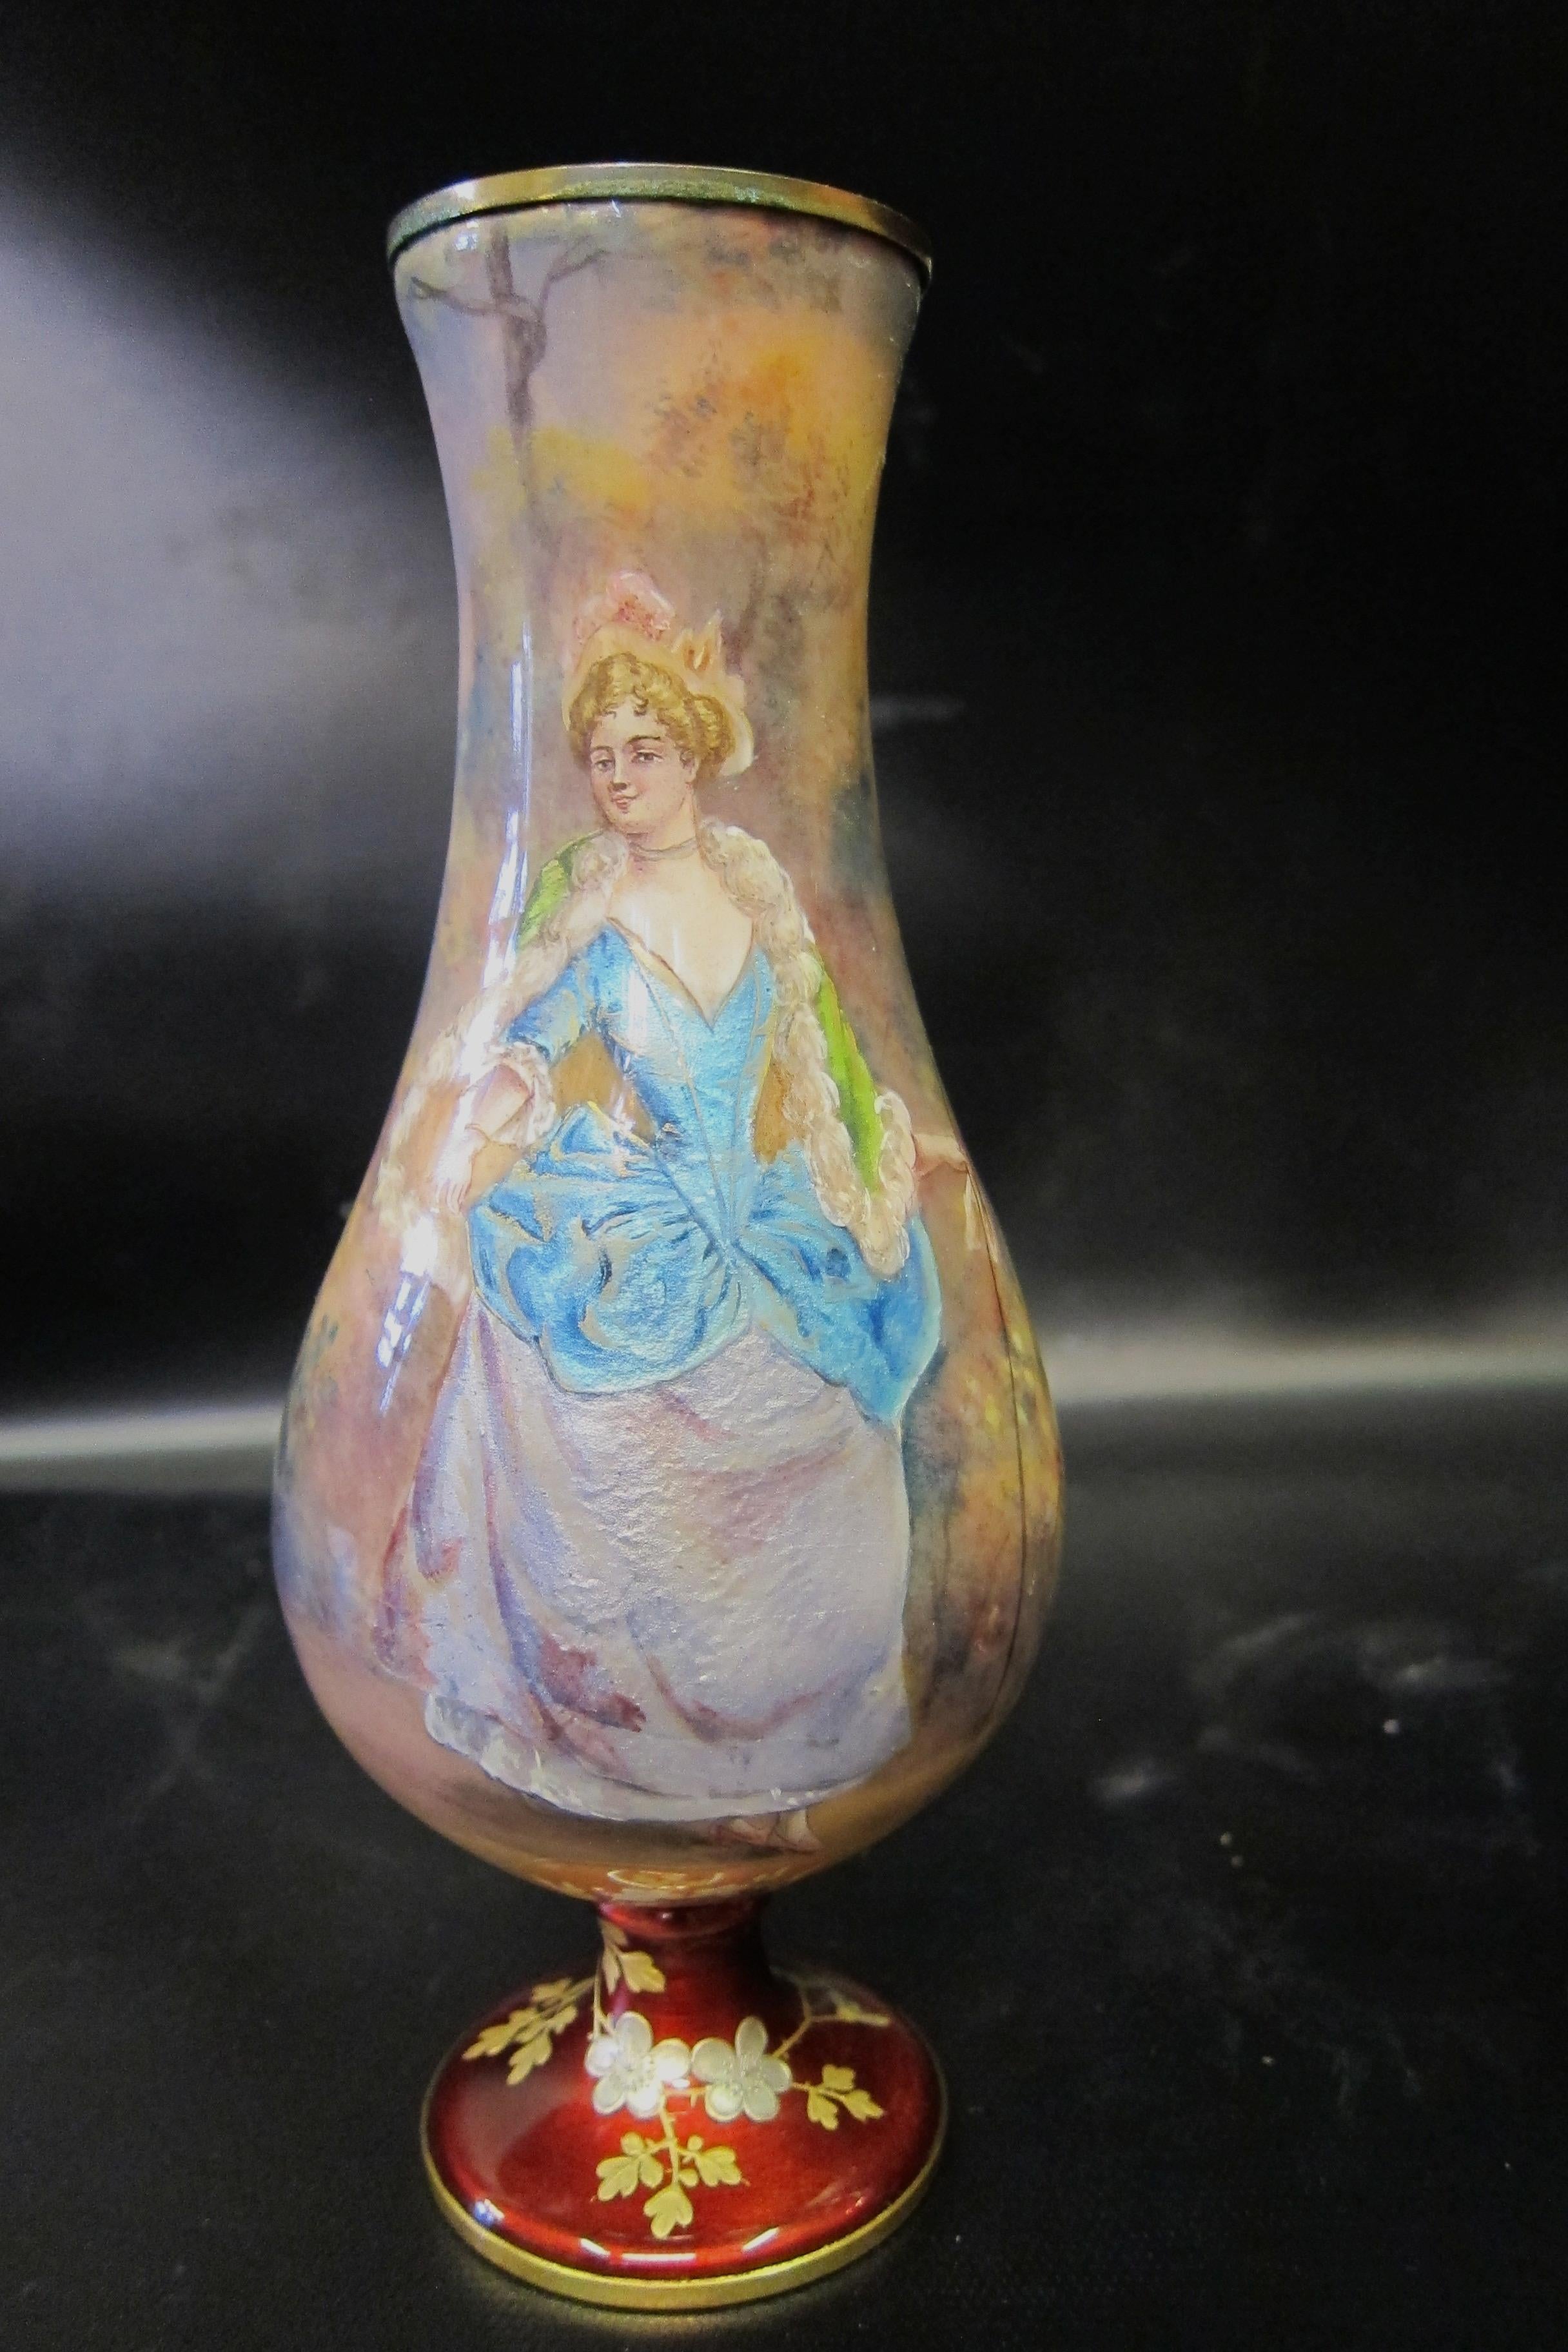 An exceptional vintage pair of hand painted French/Austrian enamel vases that are artist-signed & designed in the 19th century. The vases display detailed and elaborately costumed full figured aristocrats. The artist, Roiby, using vivid luminescent